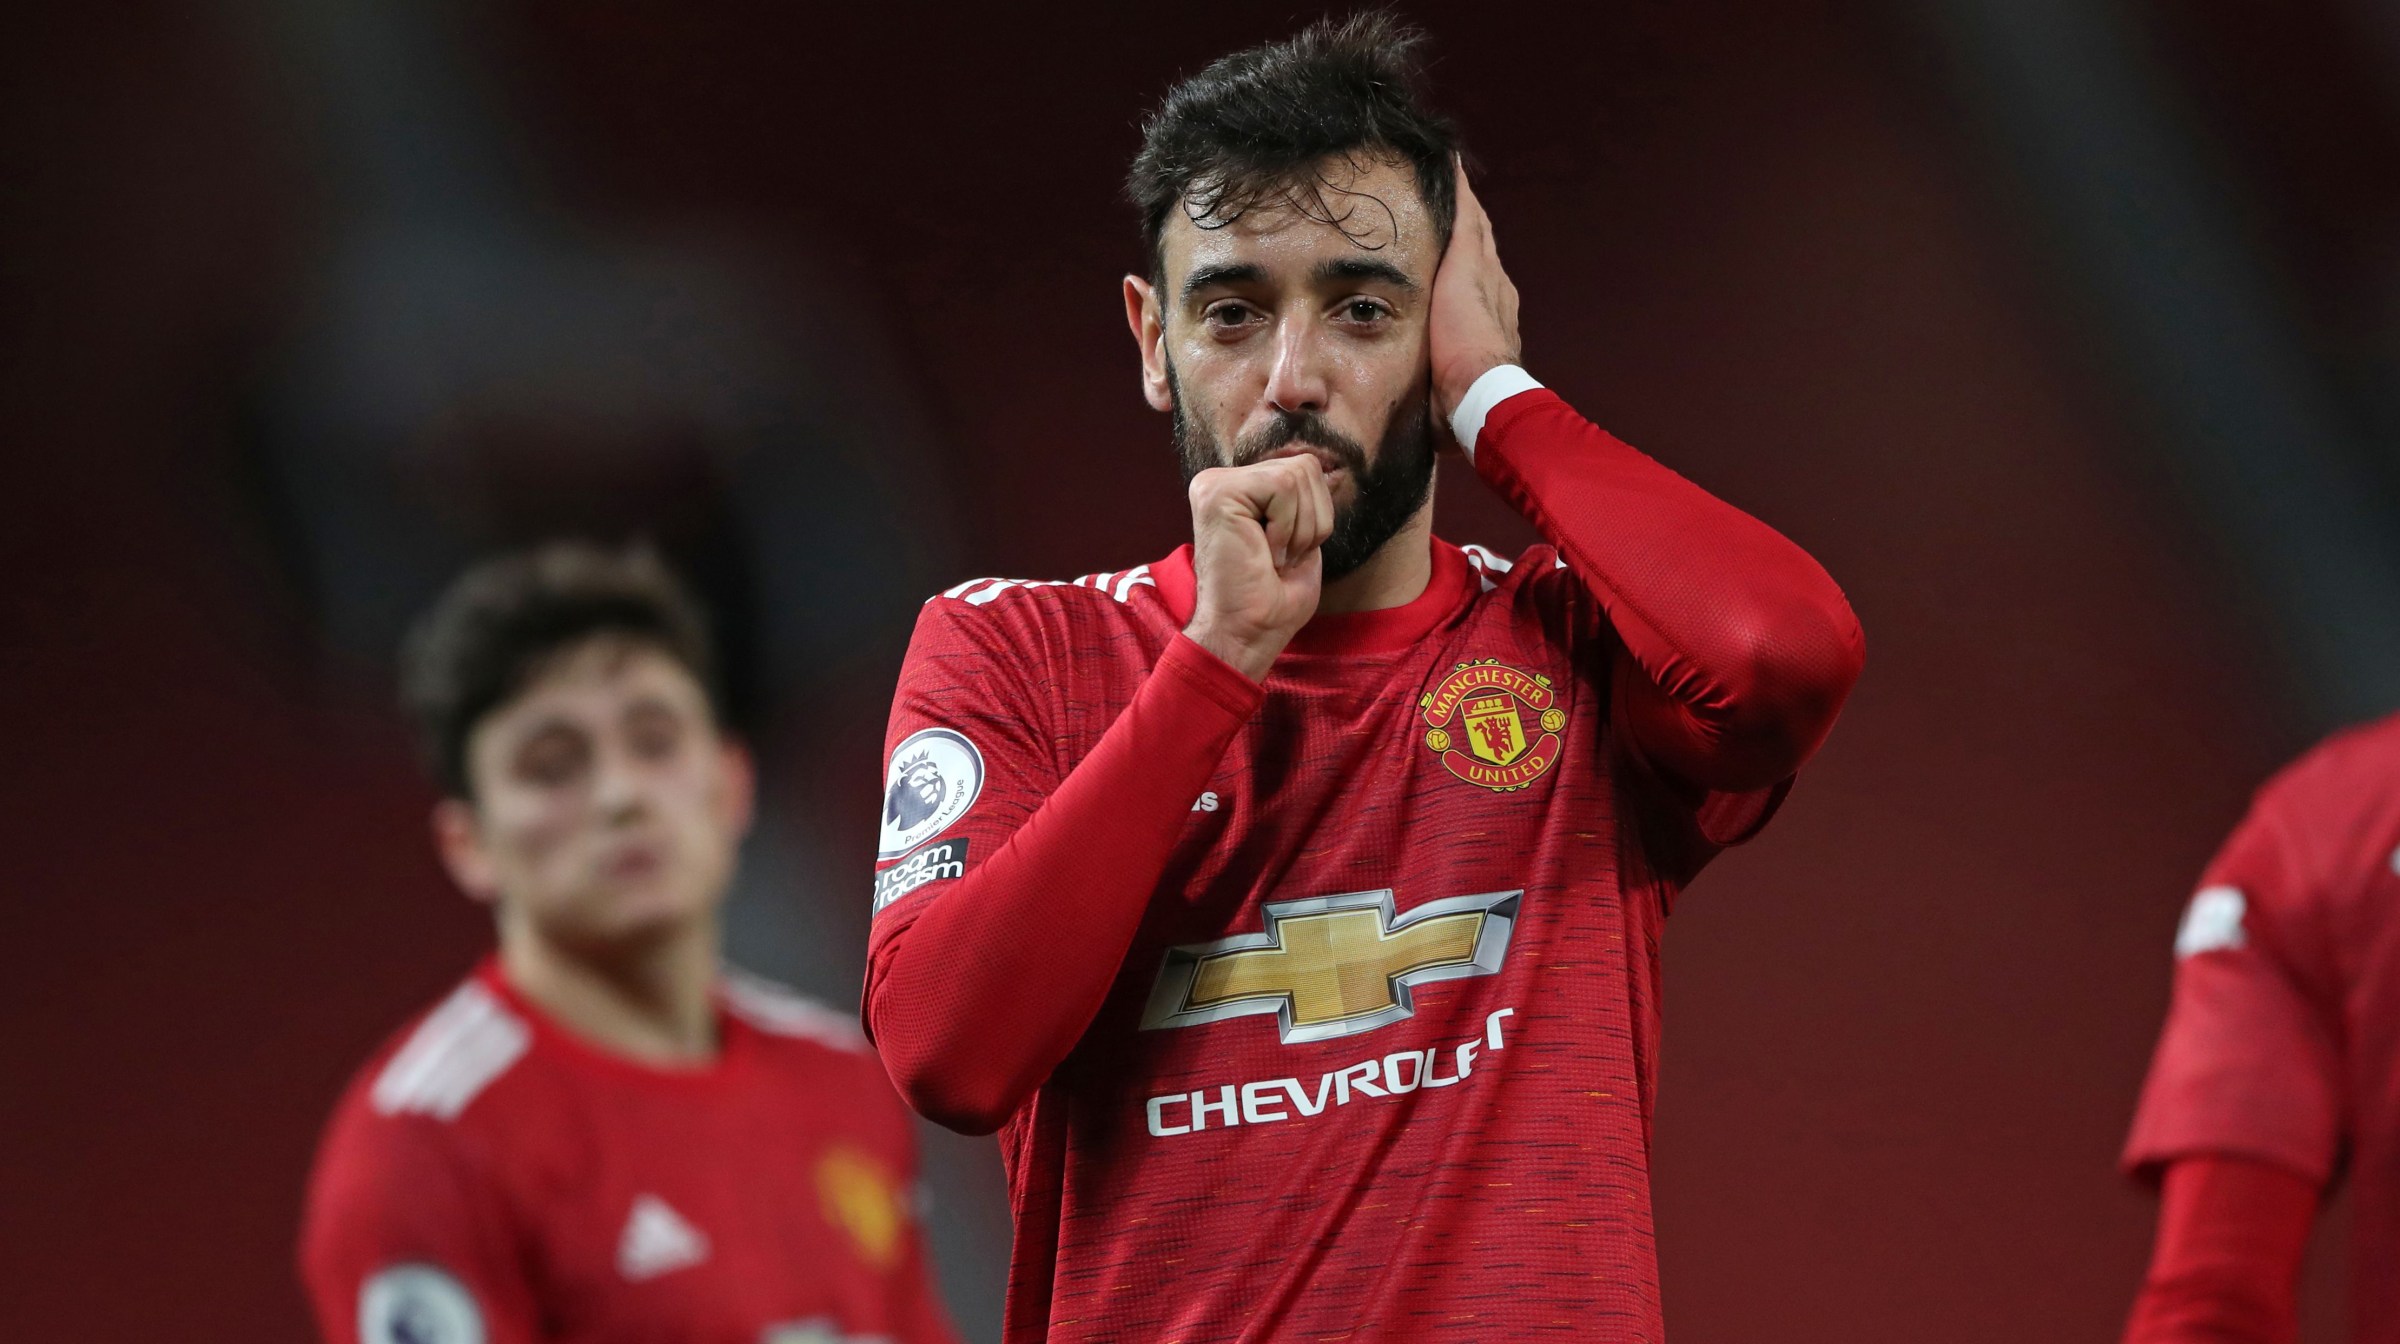 Manchester United's Portuguese midfielder Bruno Fernandes celebrates after scoring their third goal during the English Premier League football match between Manchester United and Leeds United at Old Trafford in Manchester, north west England, on December 20, 2020.